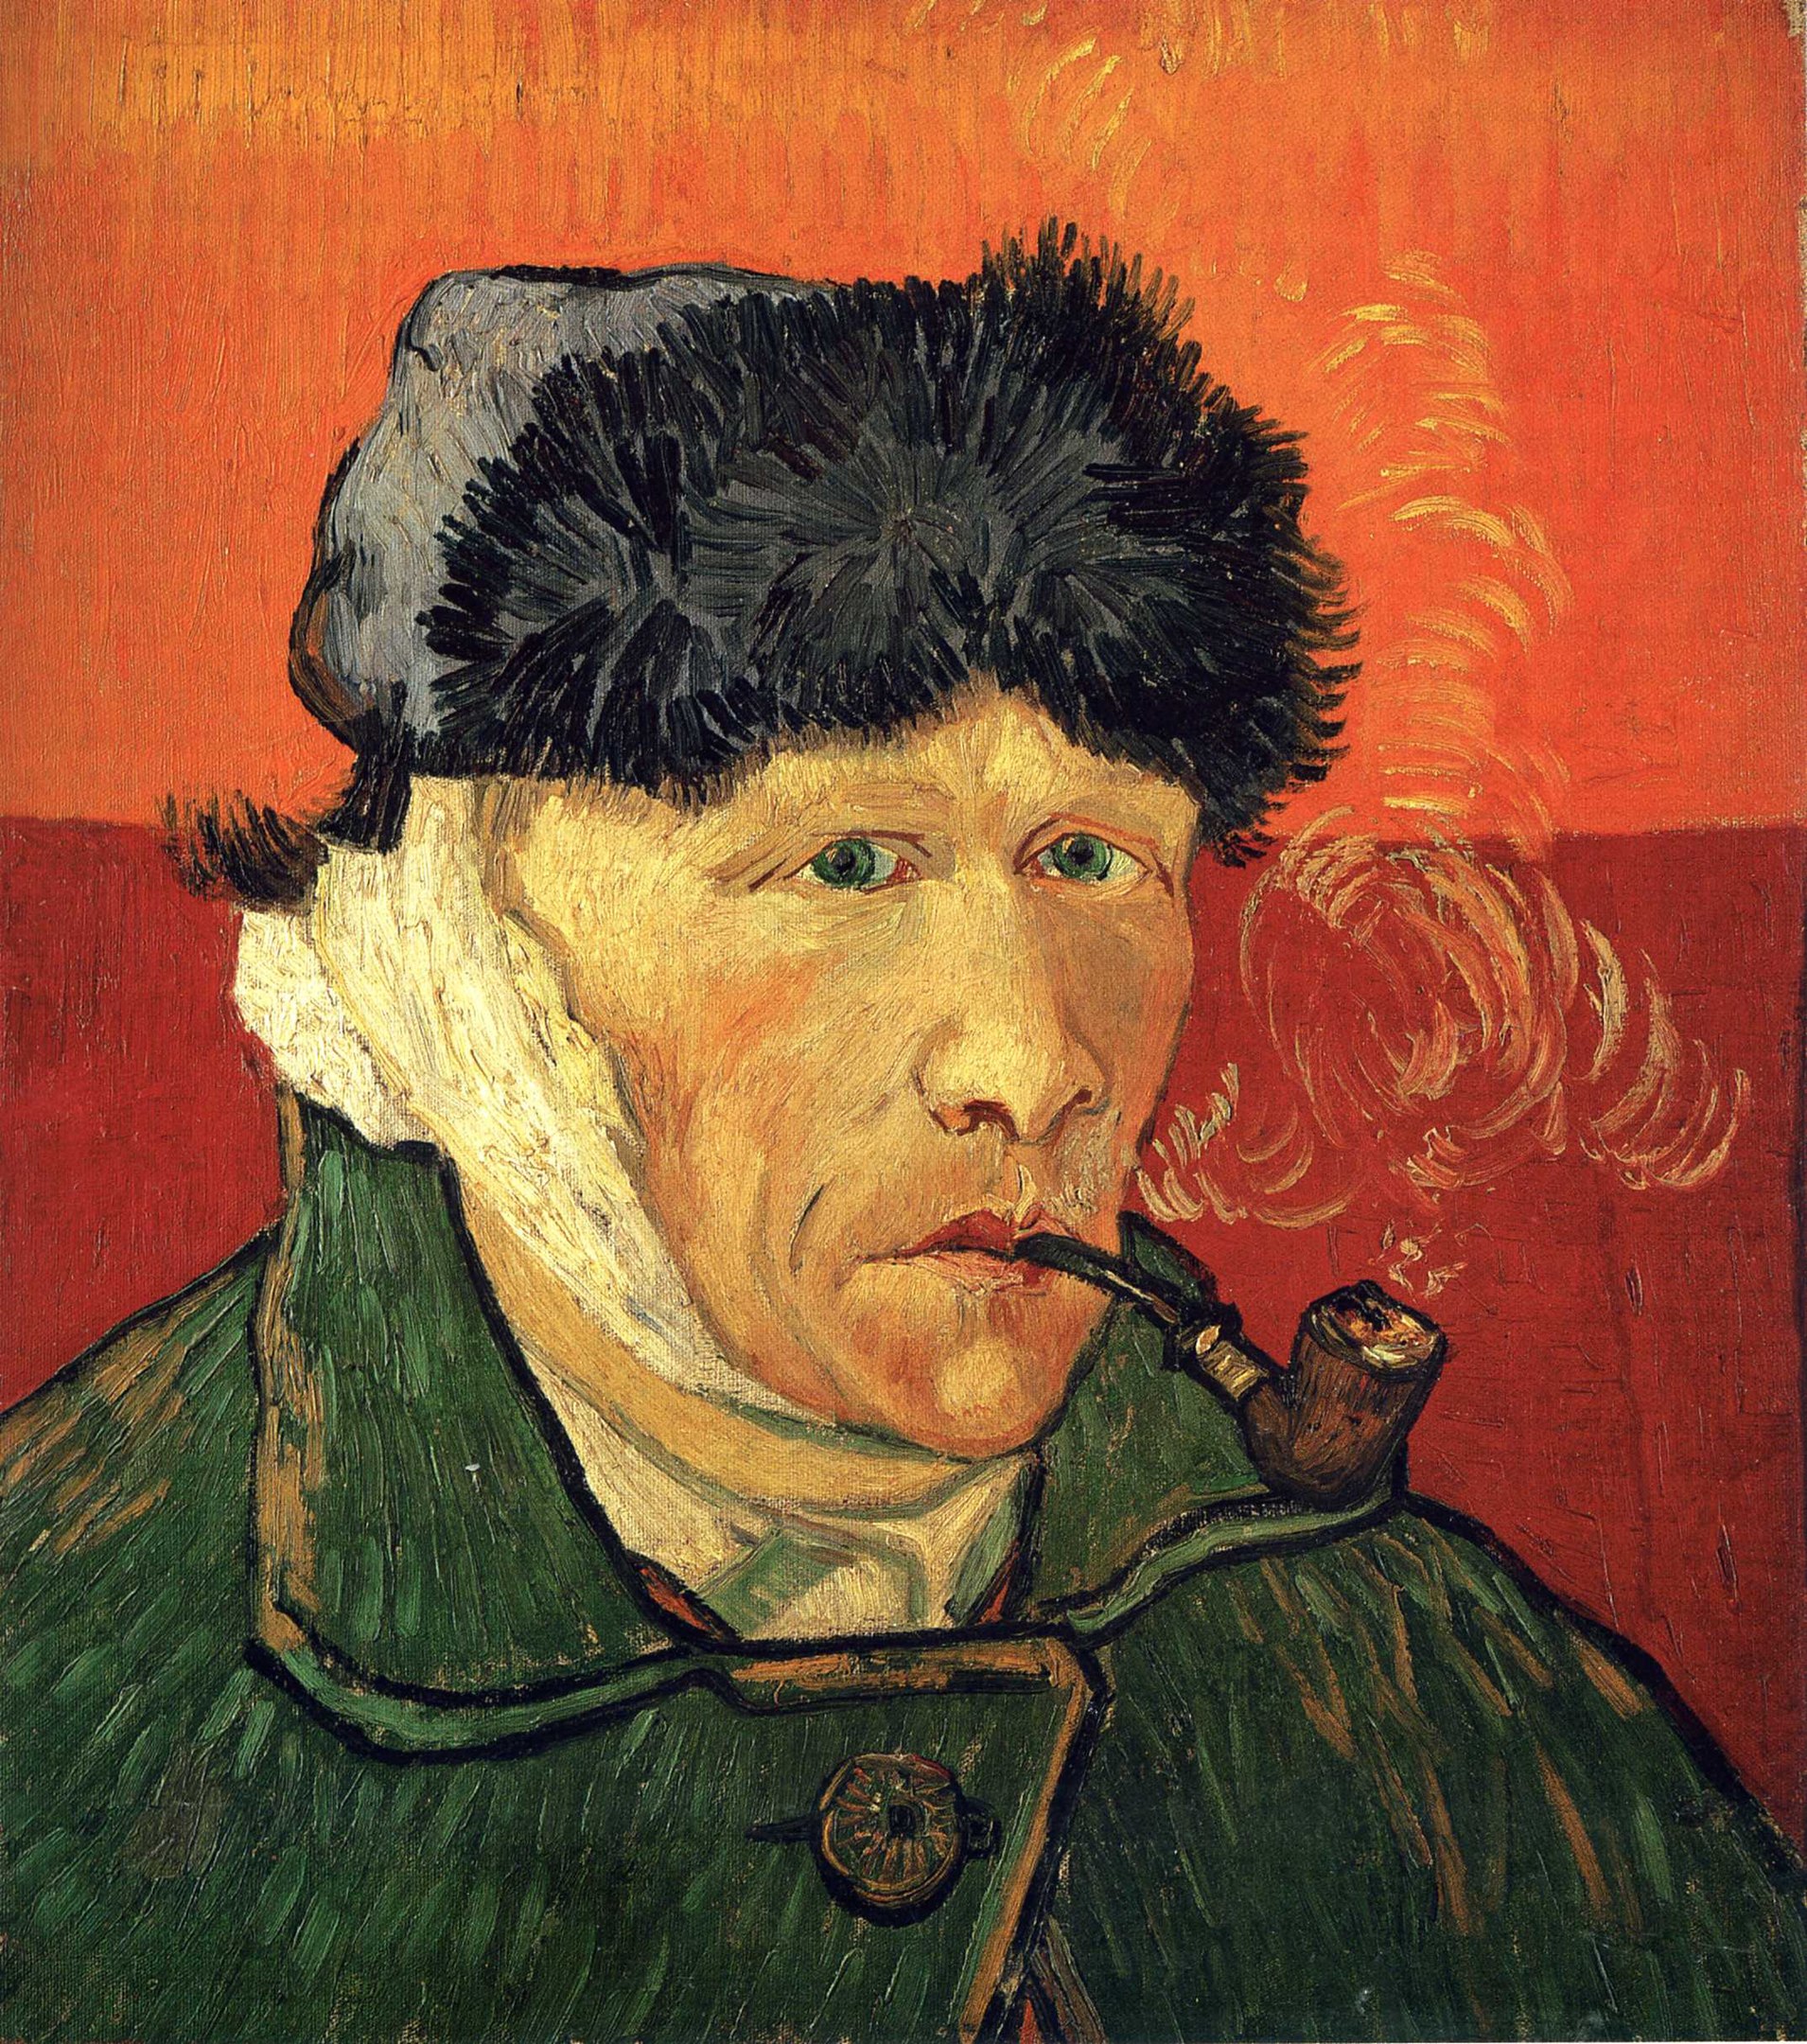 A stylistic and abstract self-portrait of a man with a smoke pipe.